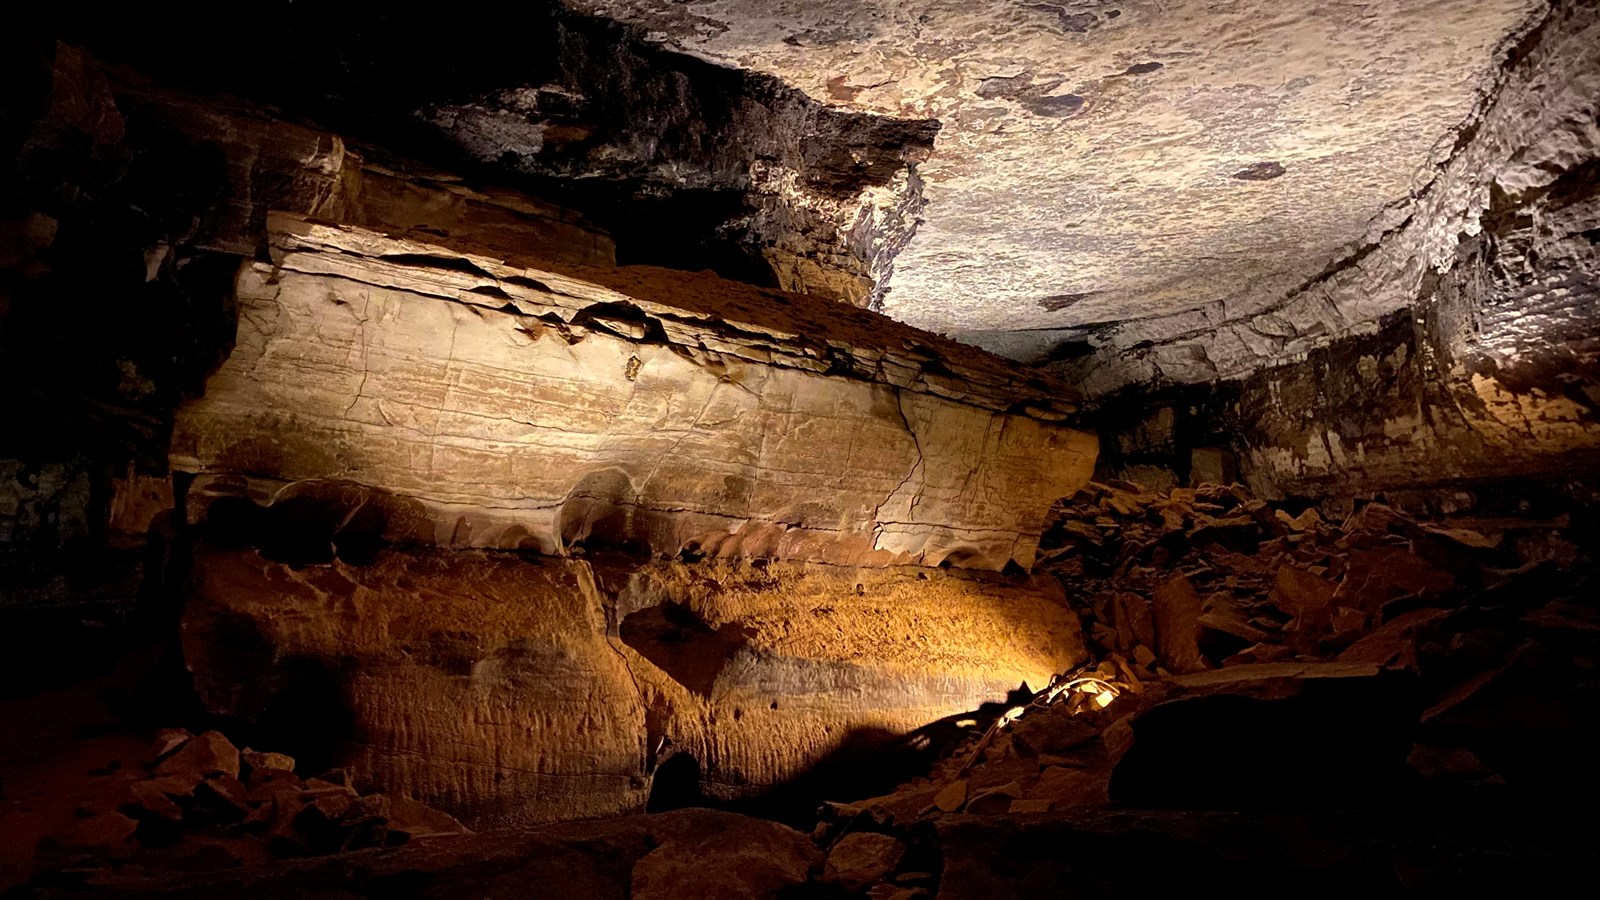 A large rock in the shape of a coffin in a large cave passage.